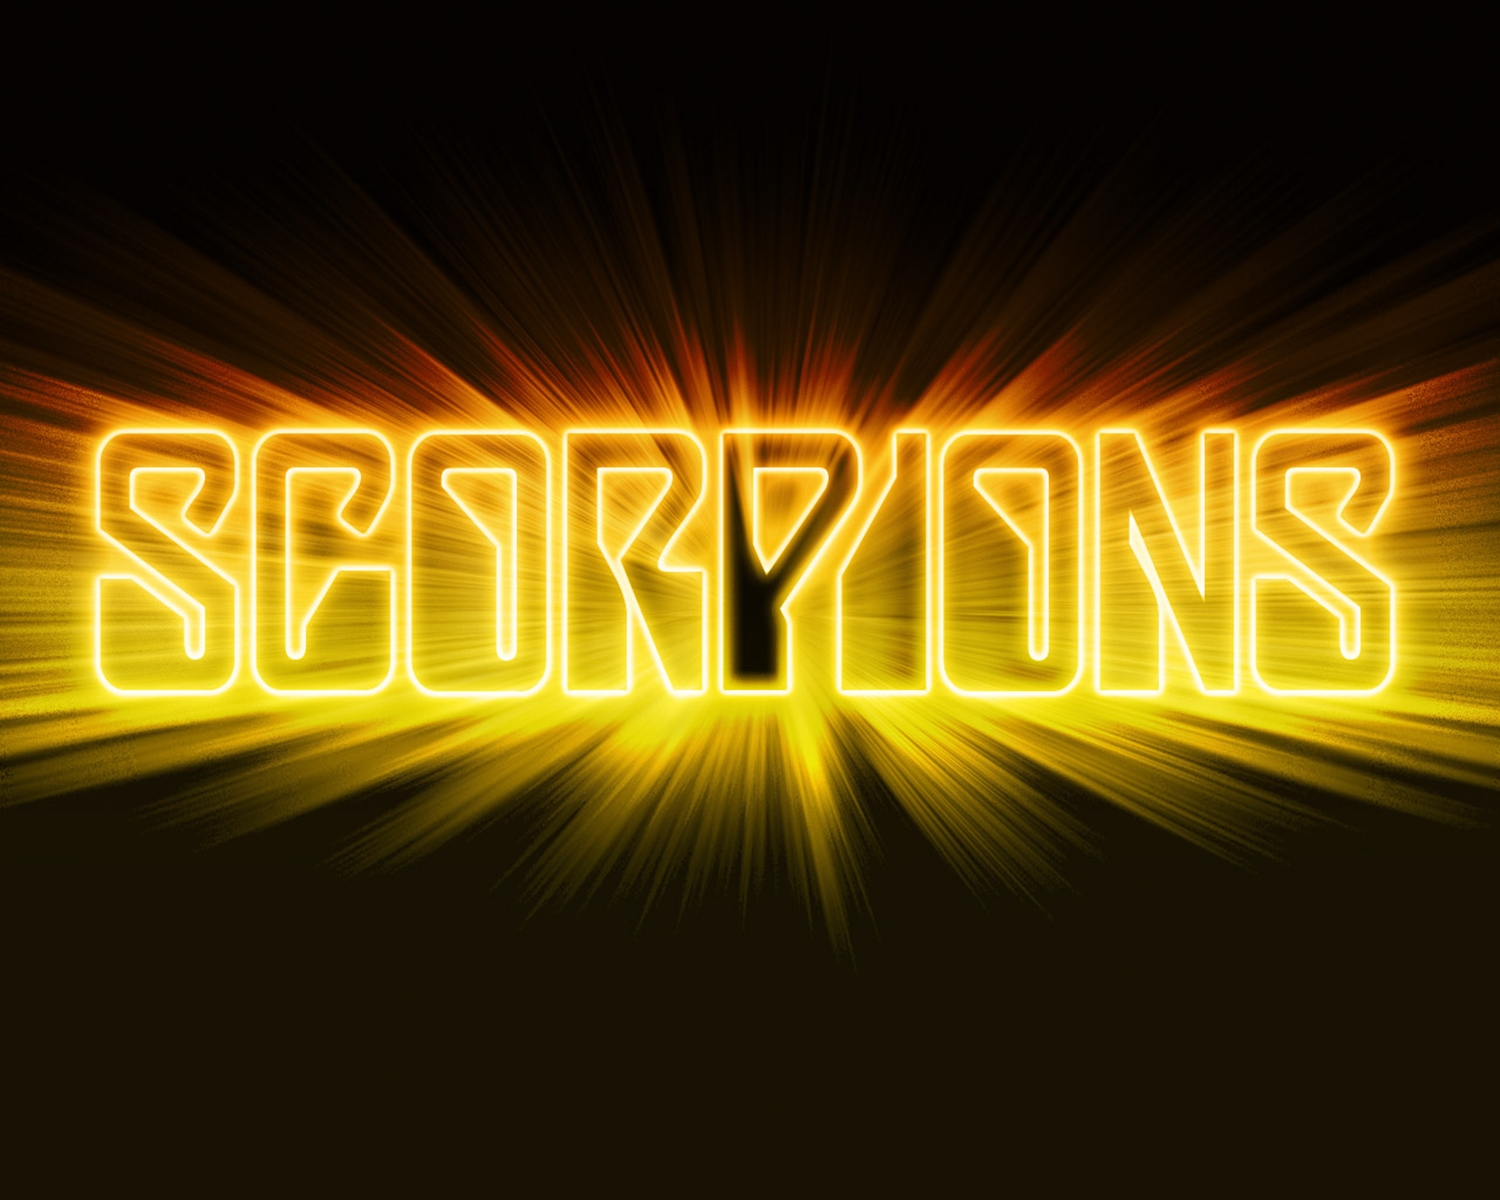 Scorpions HD download for free